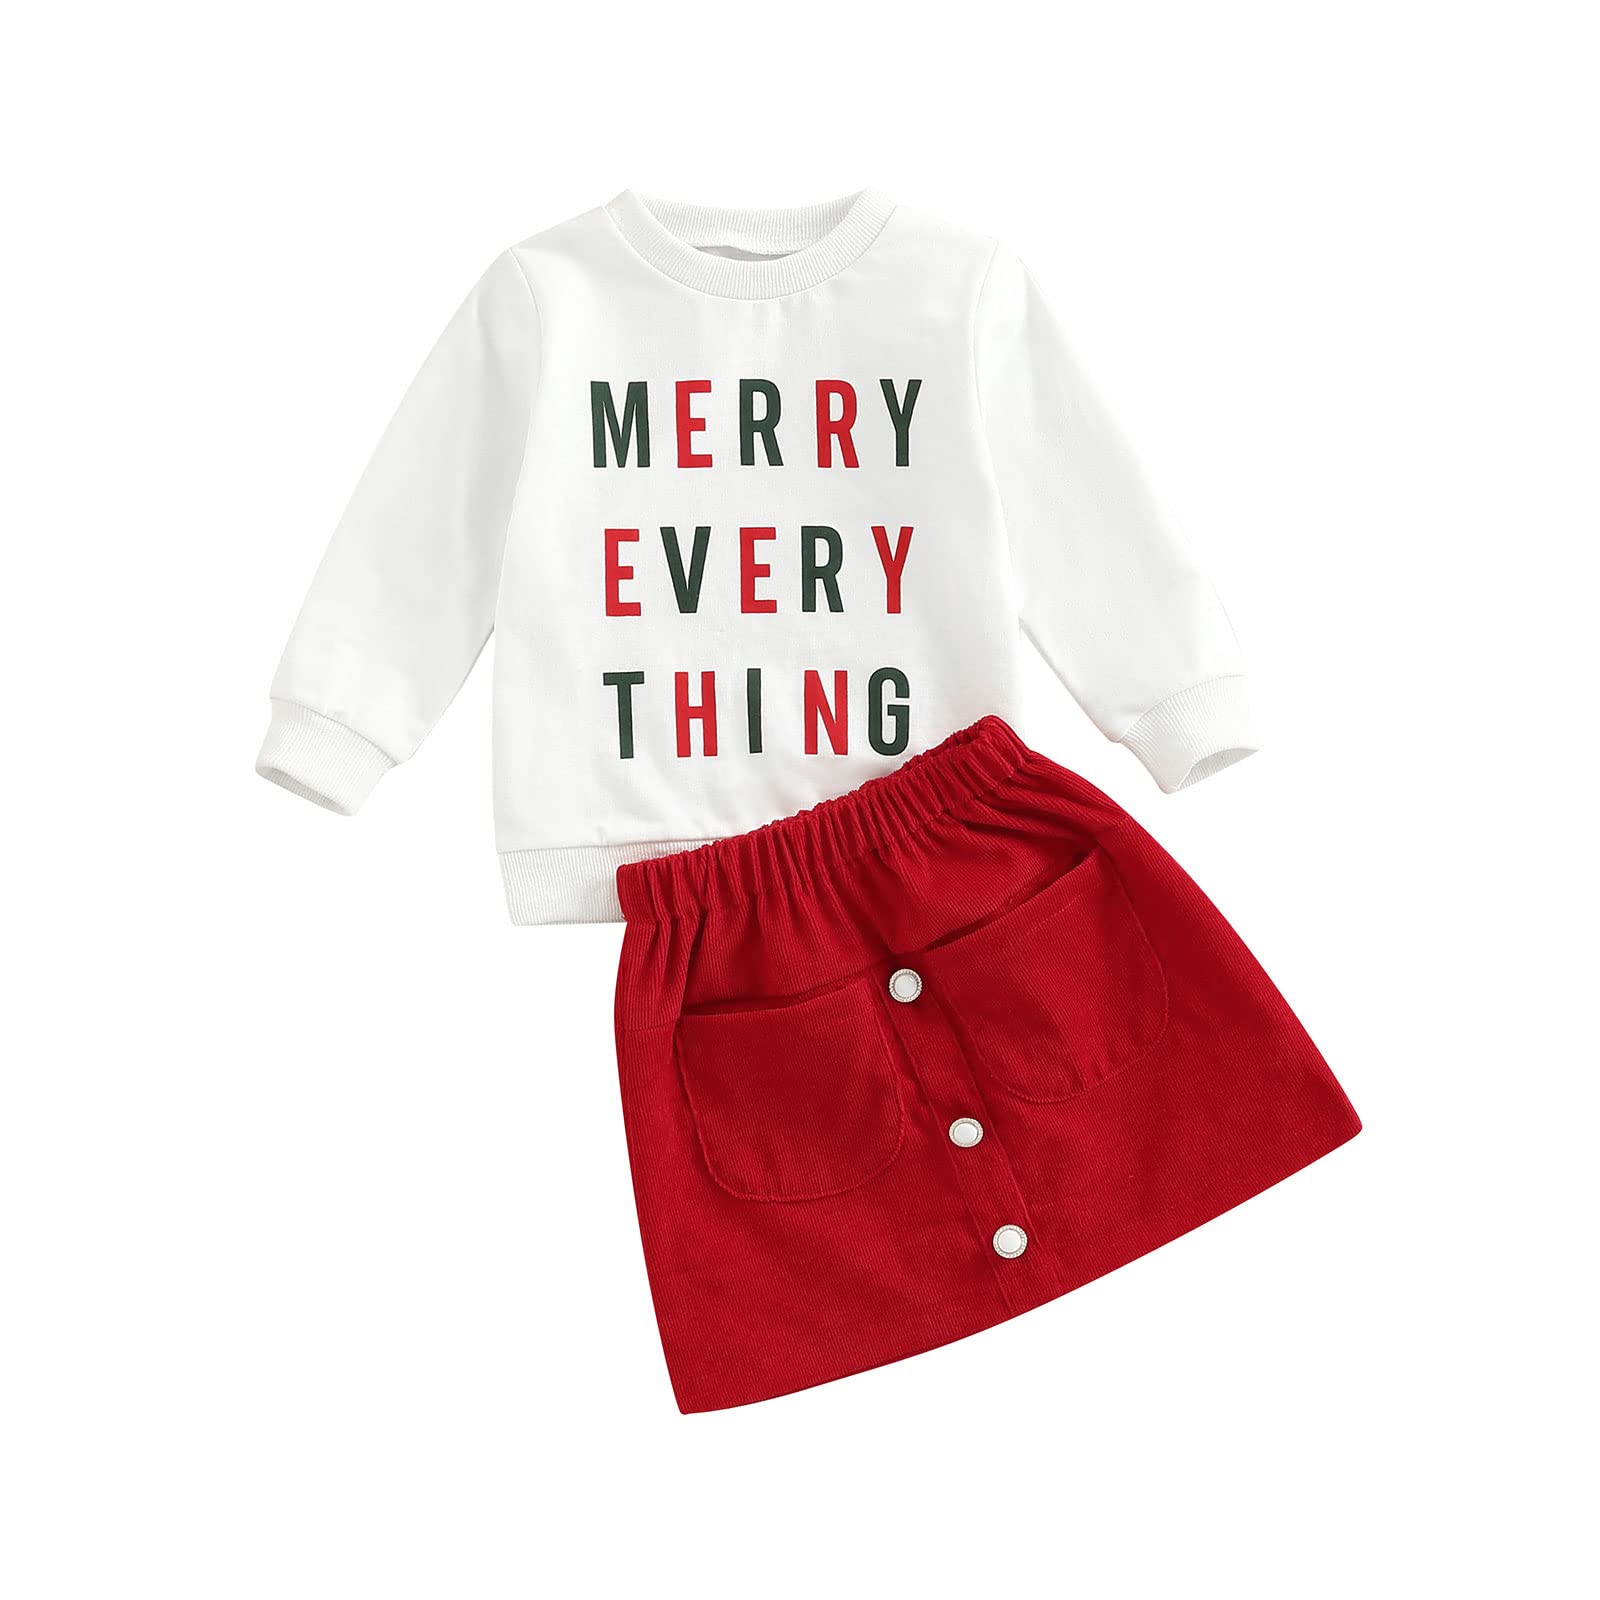 RSRZRcJ Toddler Baby girl christmas Outfit Long Sleeve Merry Letter Sweatshirt Top corduroy Mini Skirt 2PcS clothes Set (Letter 